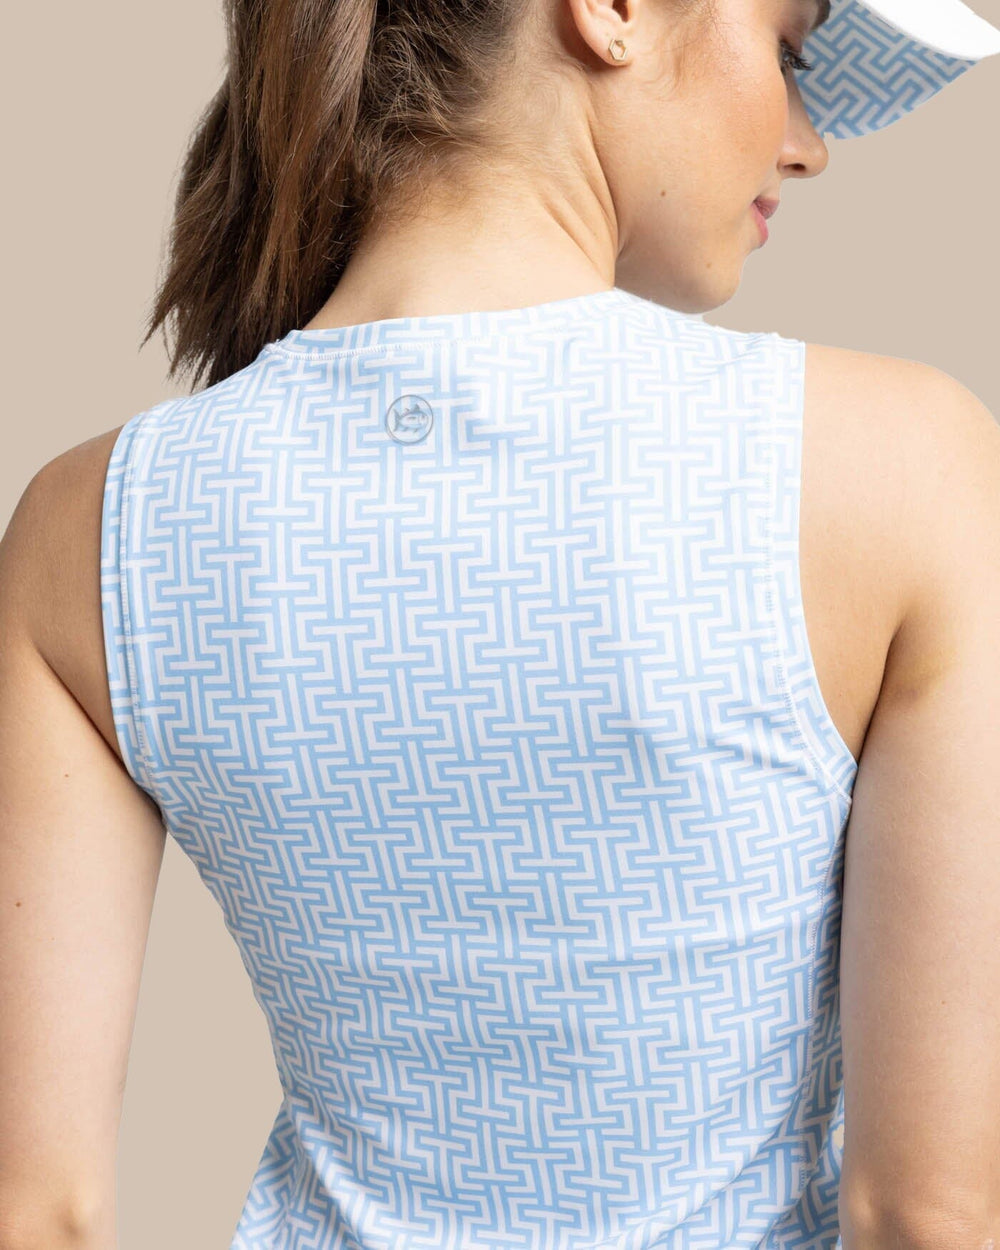 The detail view of the Southern Tide Lyllee Printed Performance Dress by Southern Tide - Classic White